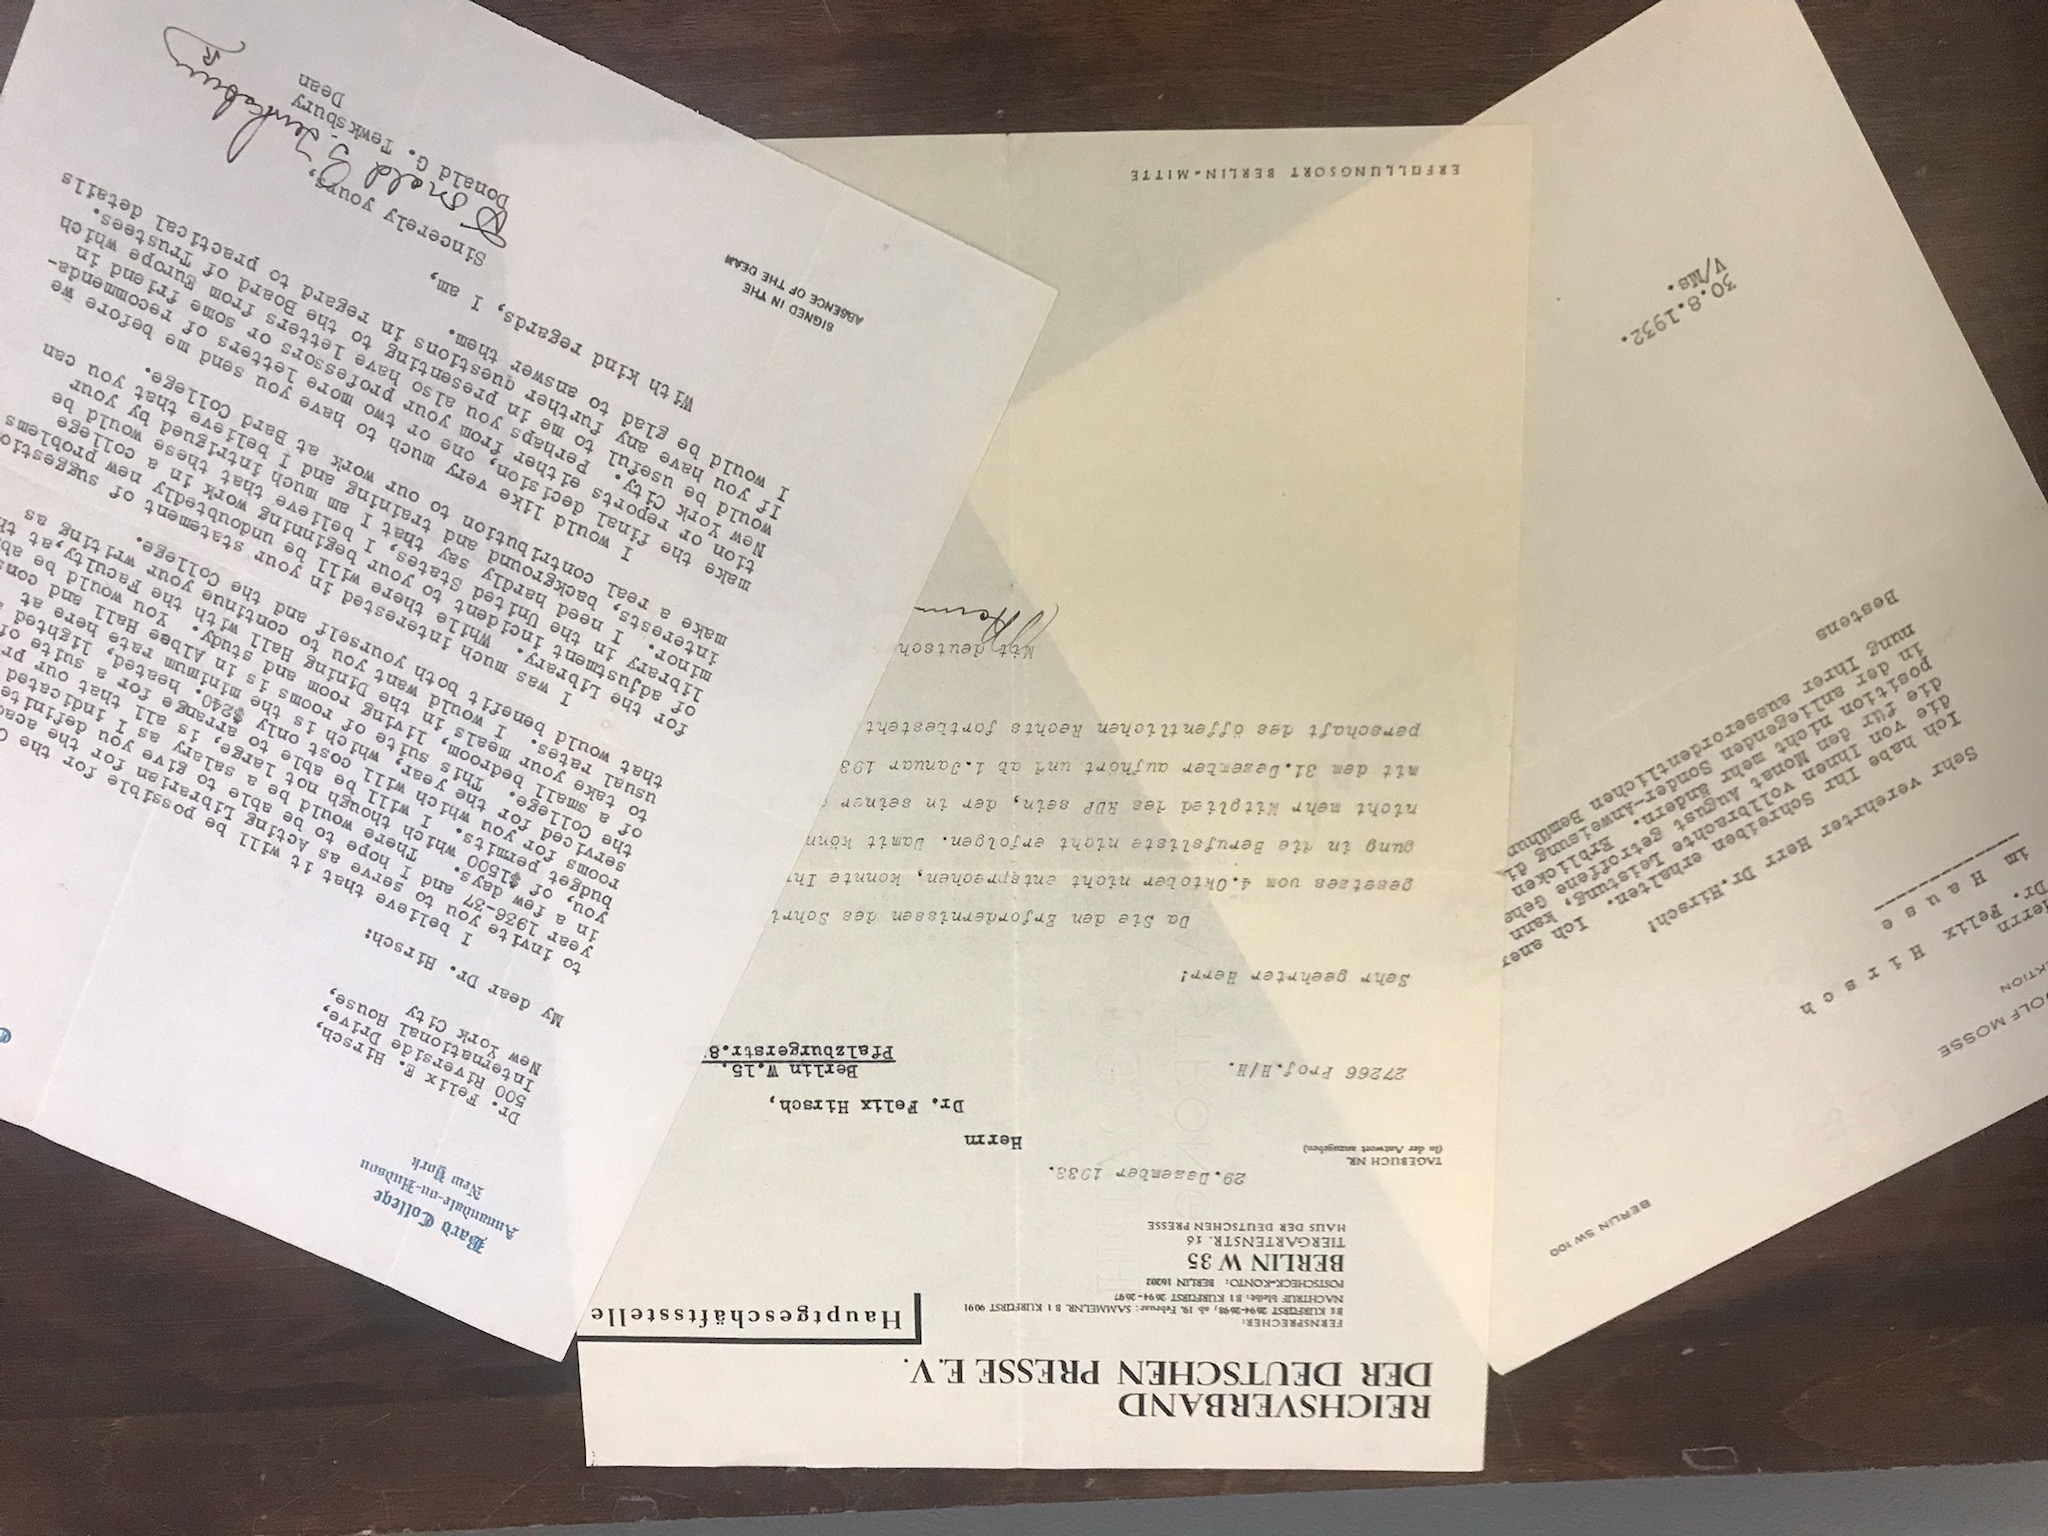 Blog Post: Processing Archival Collections as a Bilingual Archivist